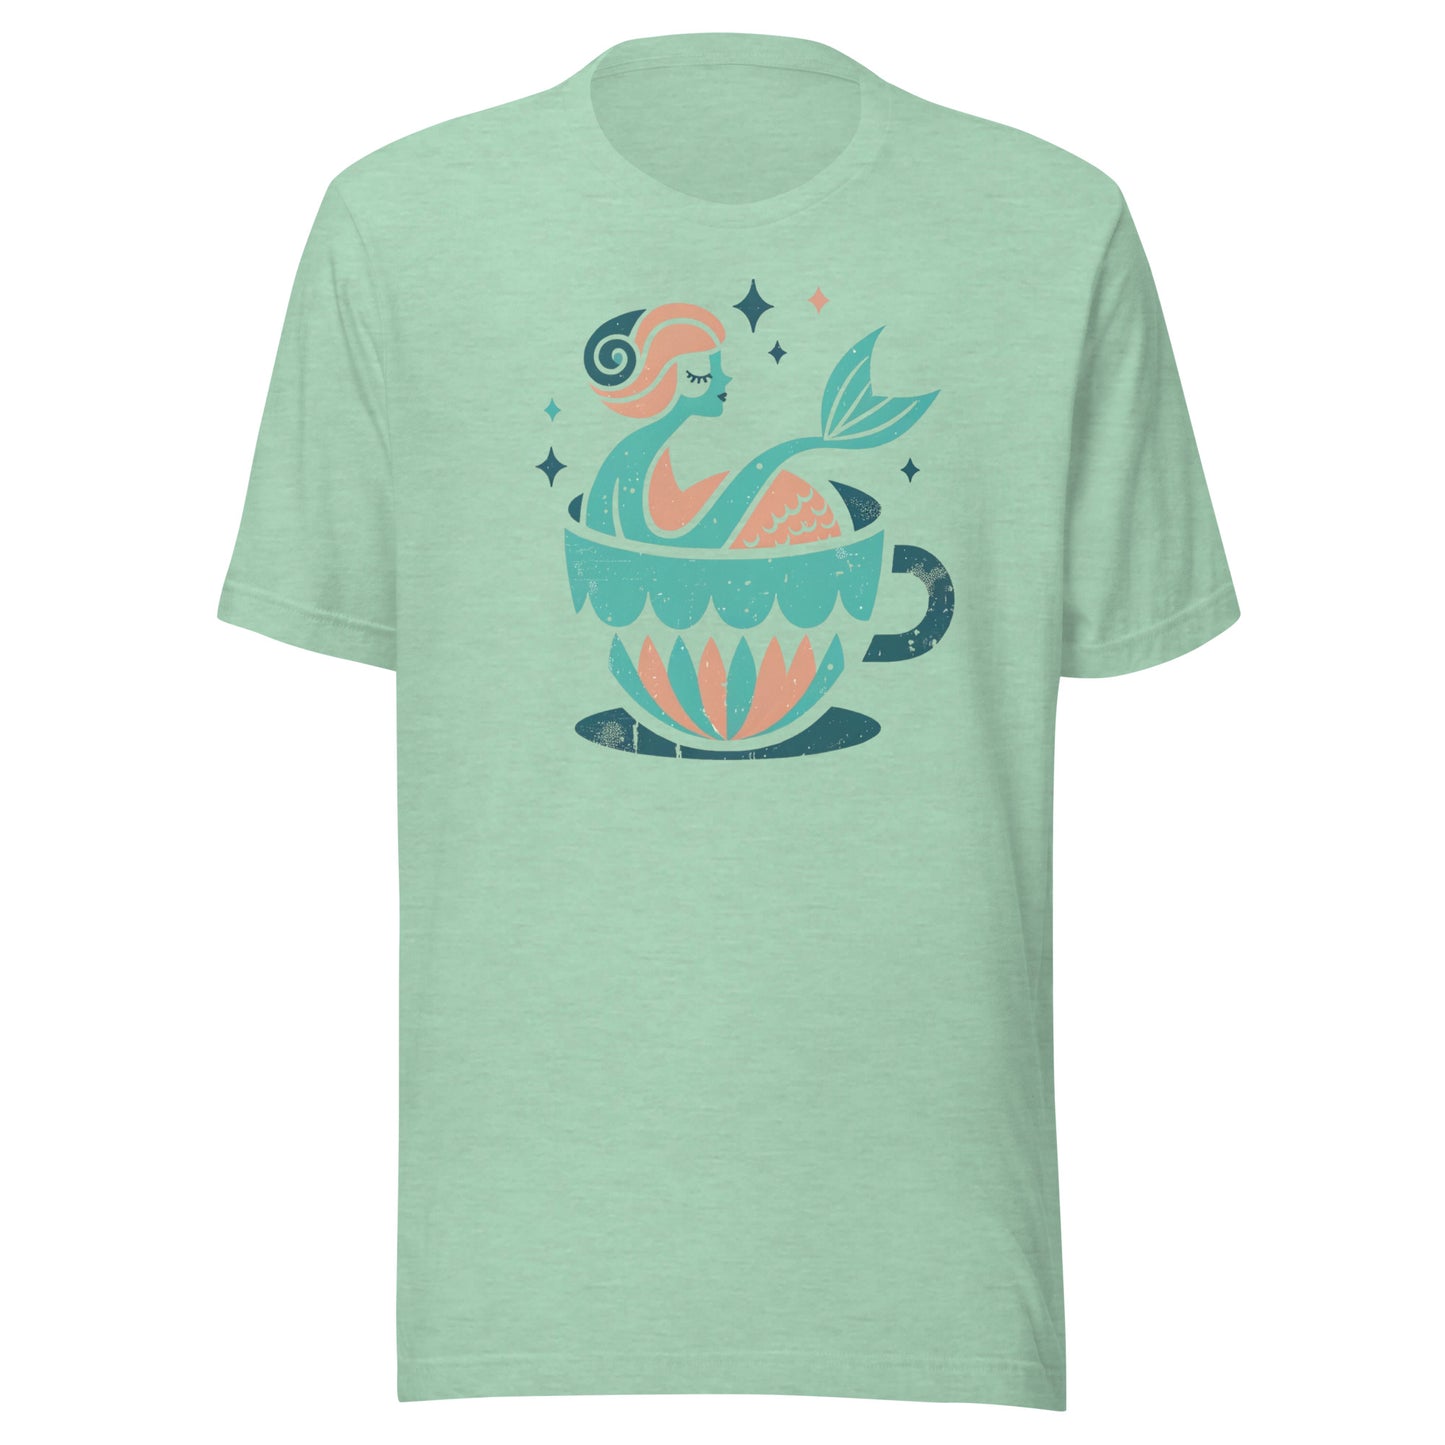 Mermaid in a Cup - Retro-Inspired Unisex Tee in Green & Pink